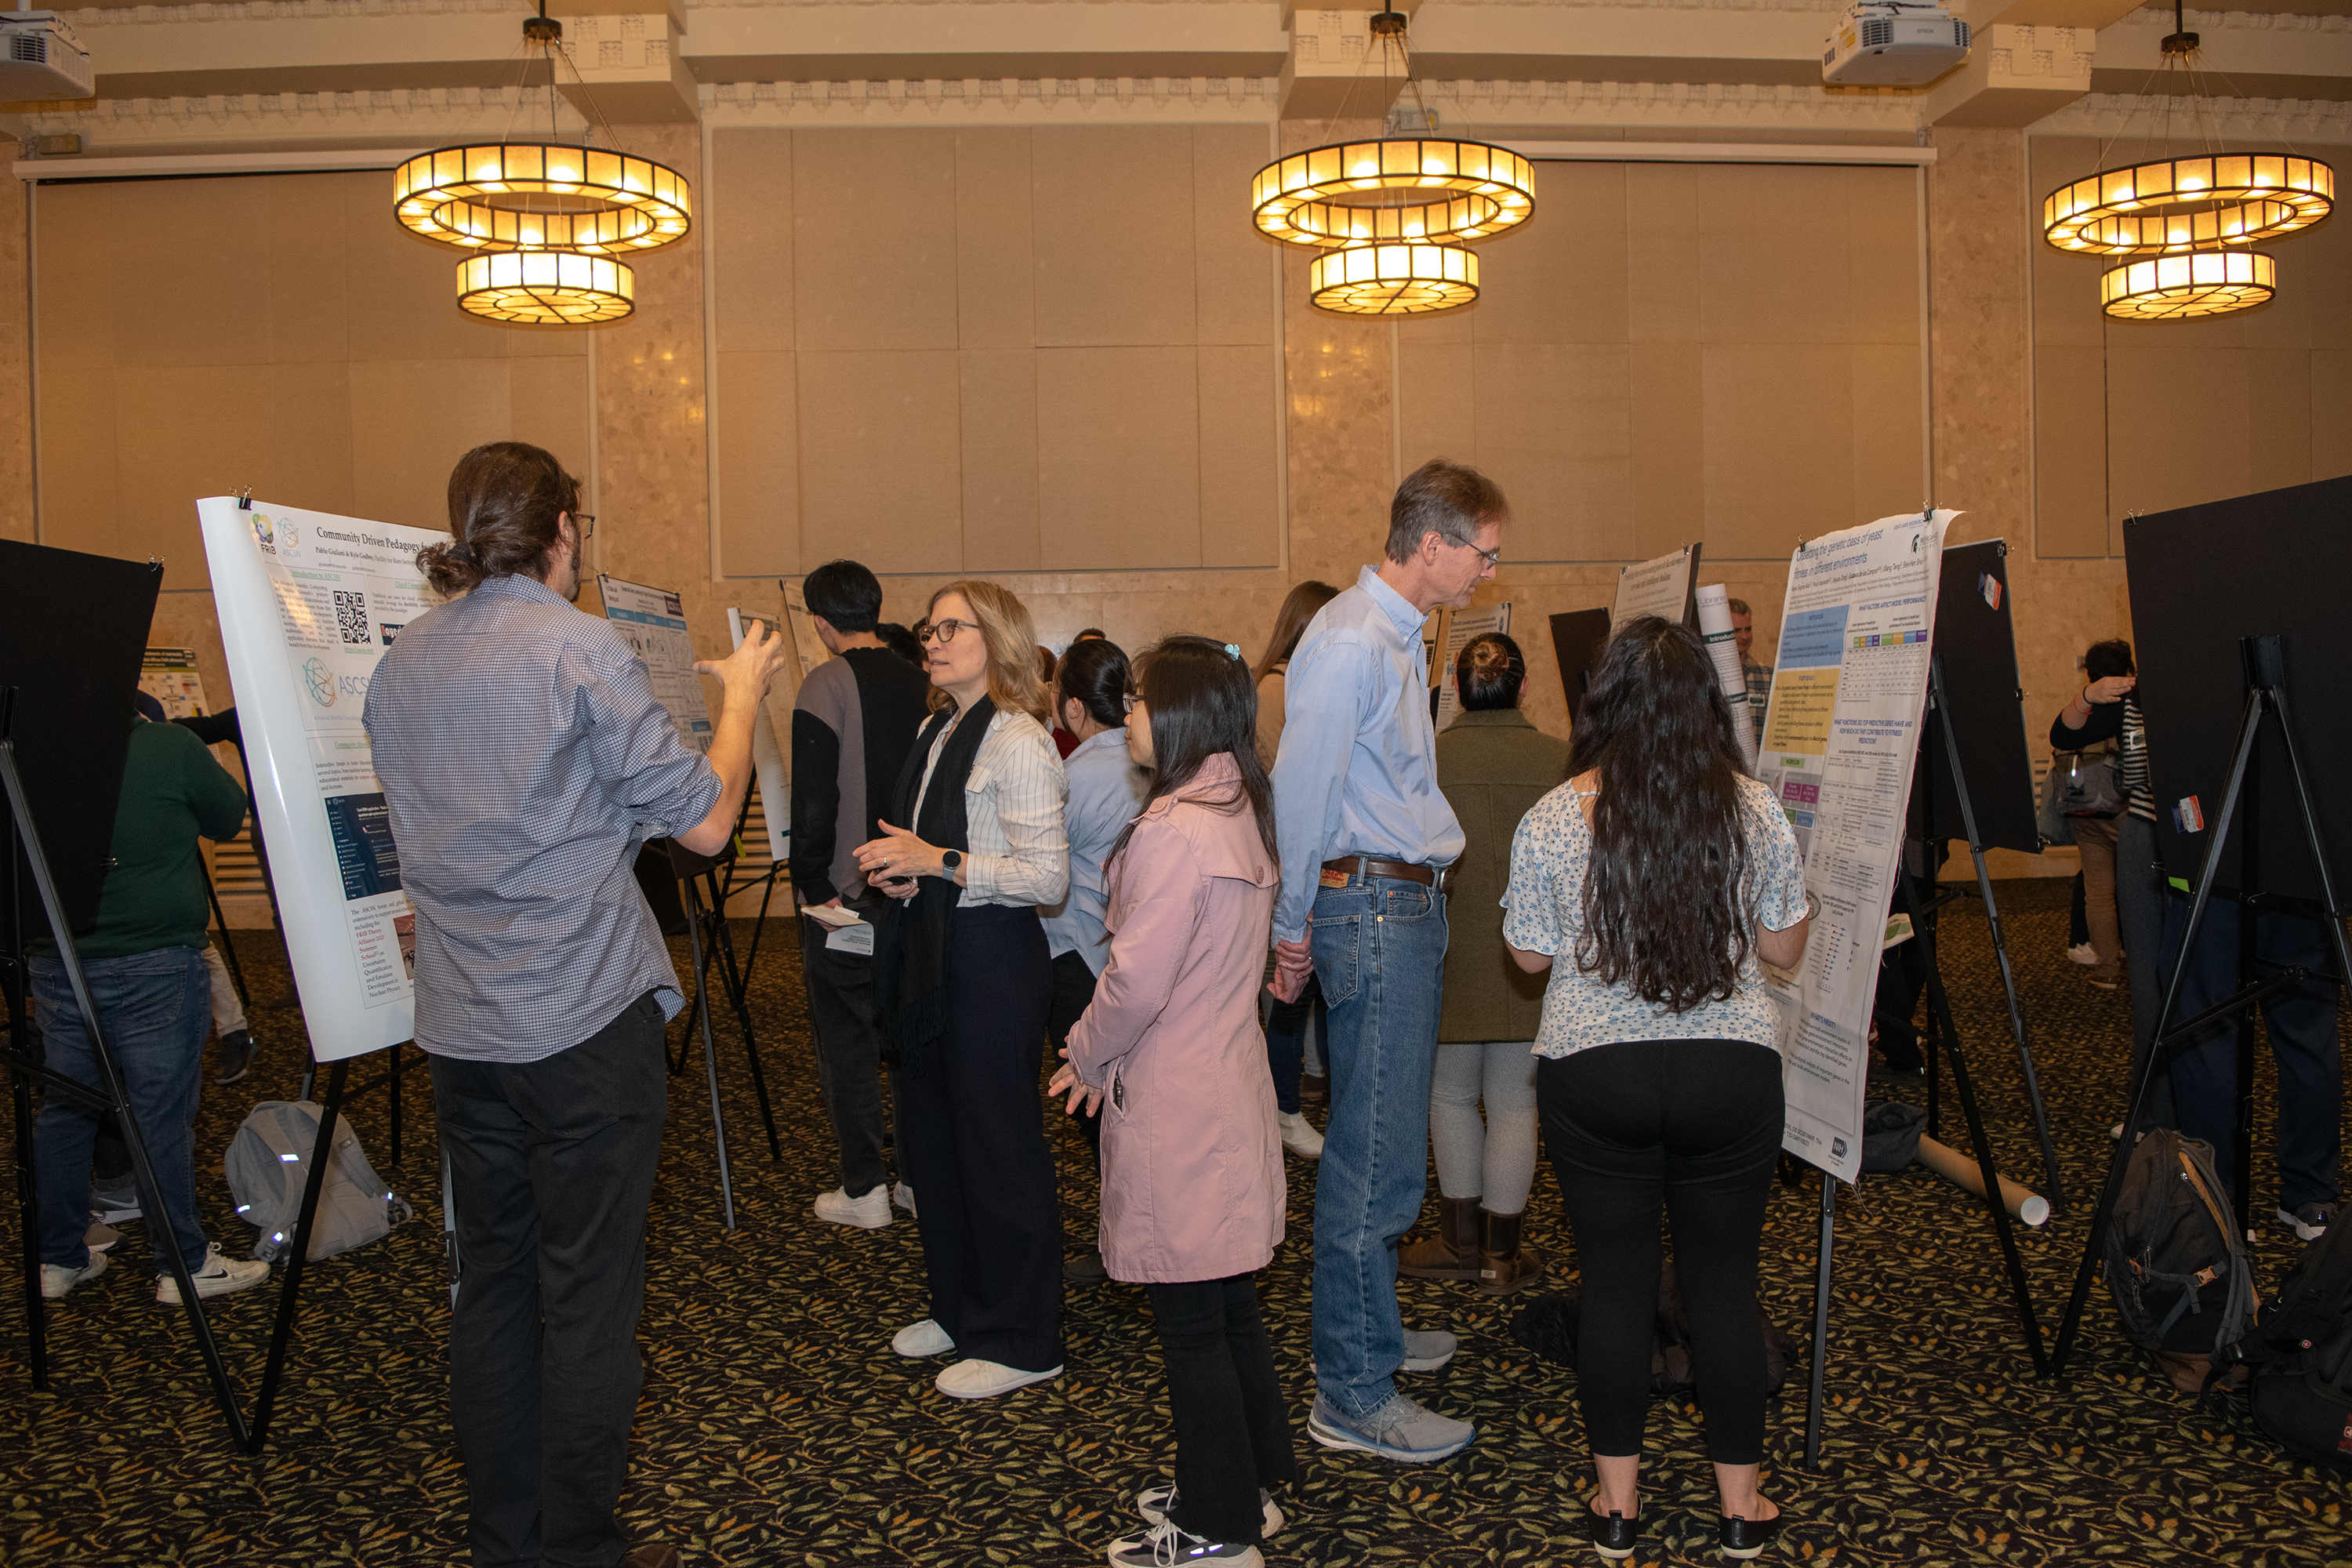 A group of people having discussions in front of research posters